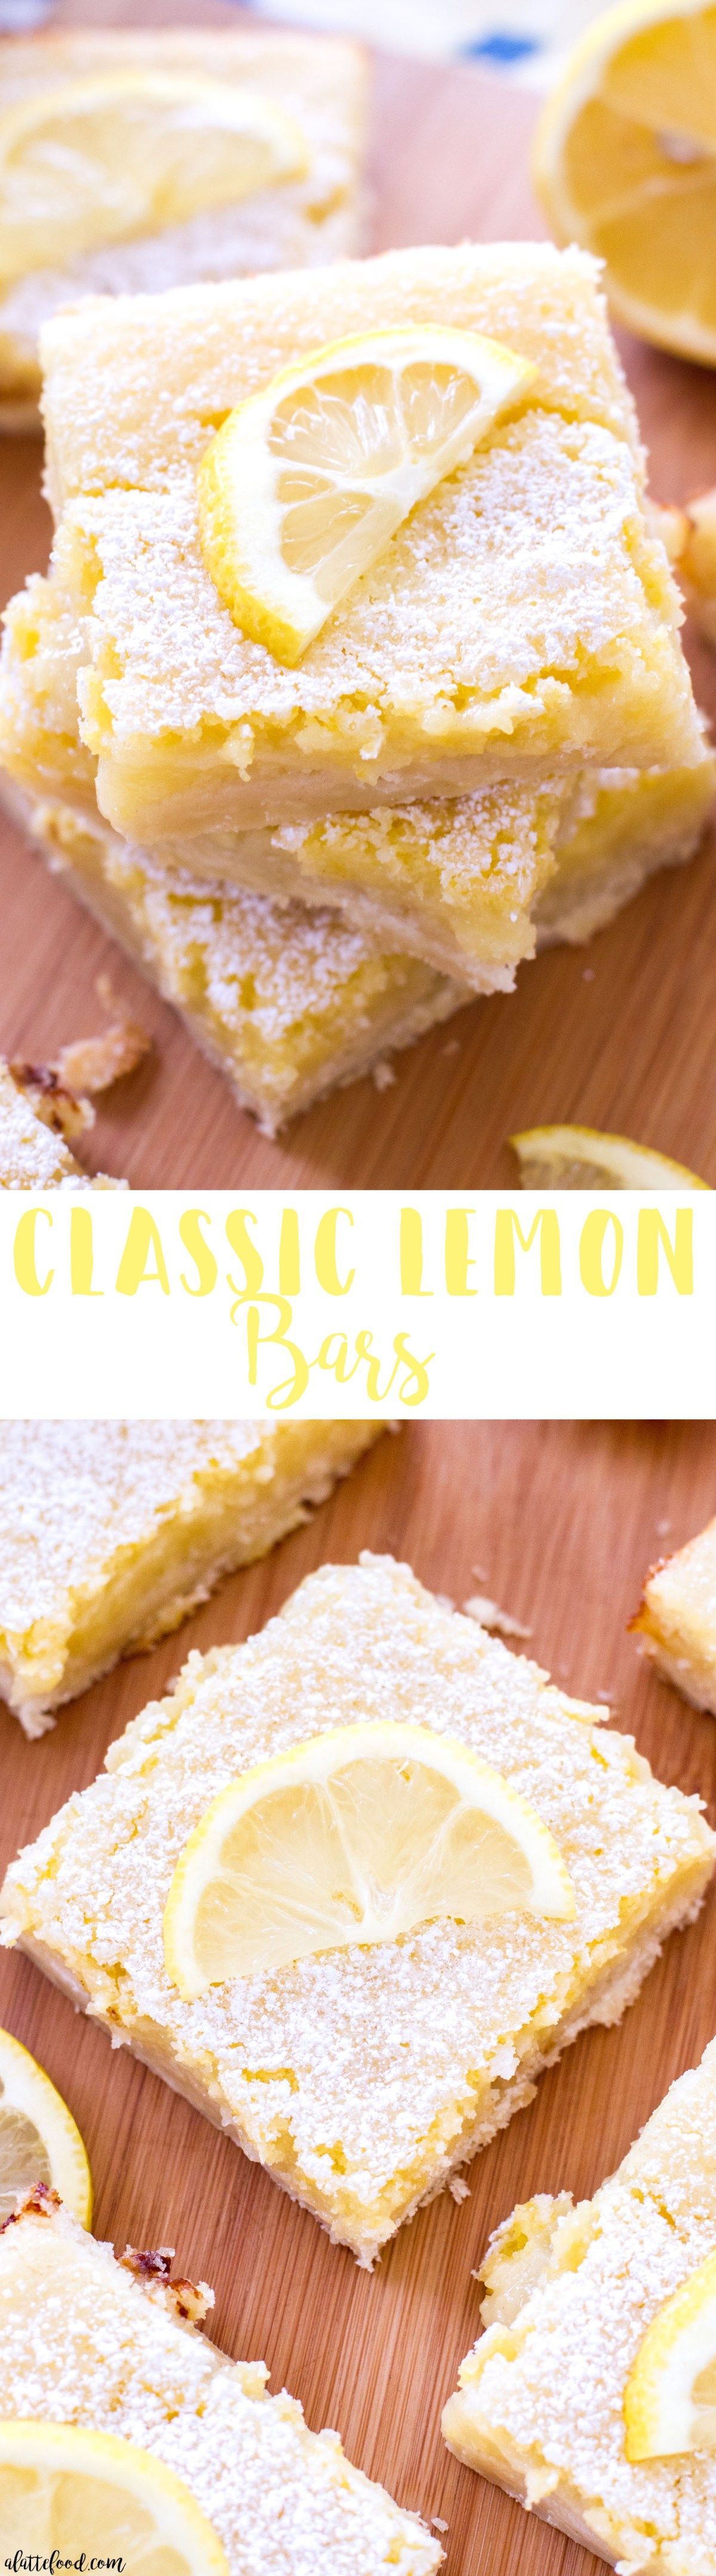 These classic homemade lemon bars have a tangy lemon filling and a sweet shortbread crust! These are the perfect Easter dessert,